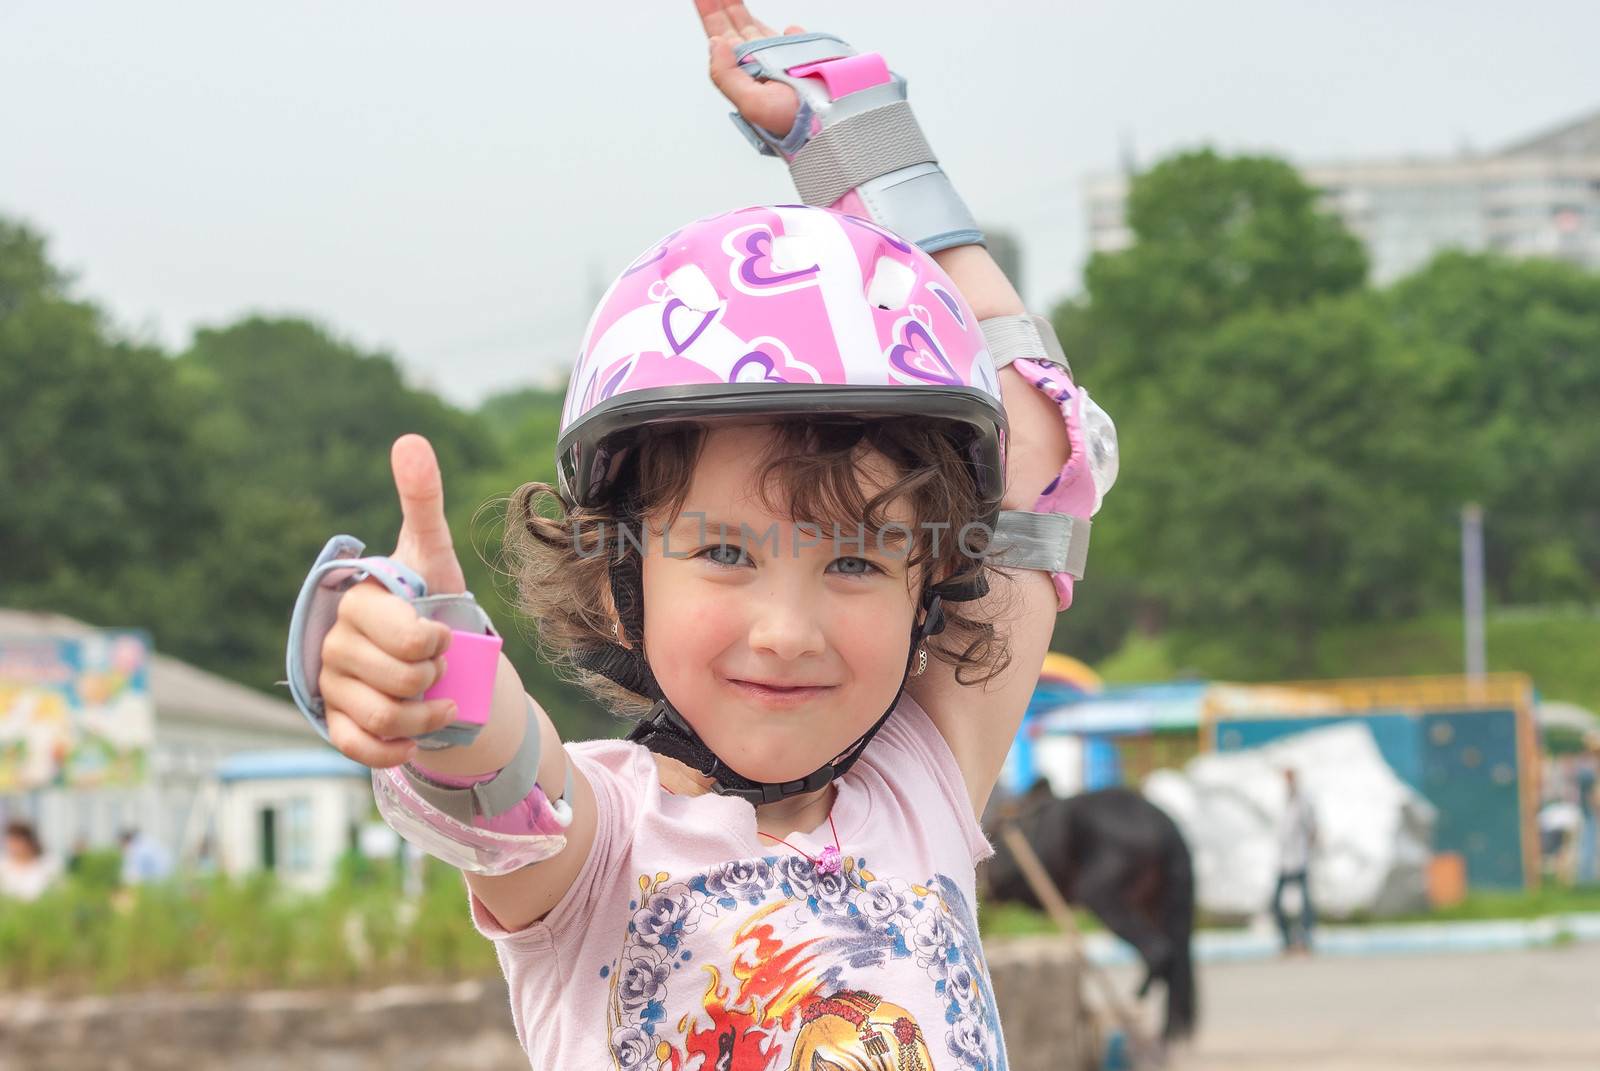 Portrait of the child in the open air on roller skates in a protective helmet